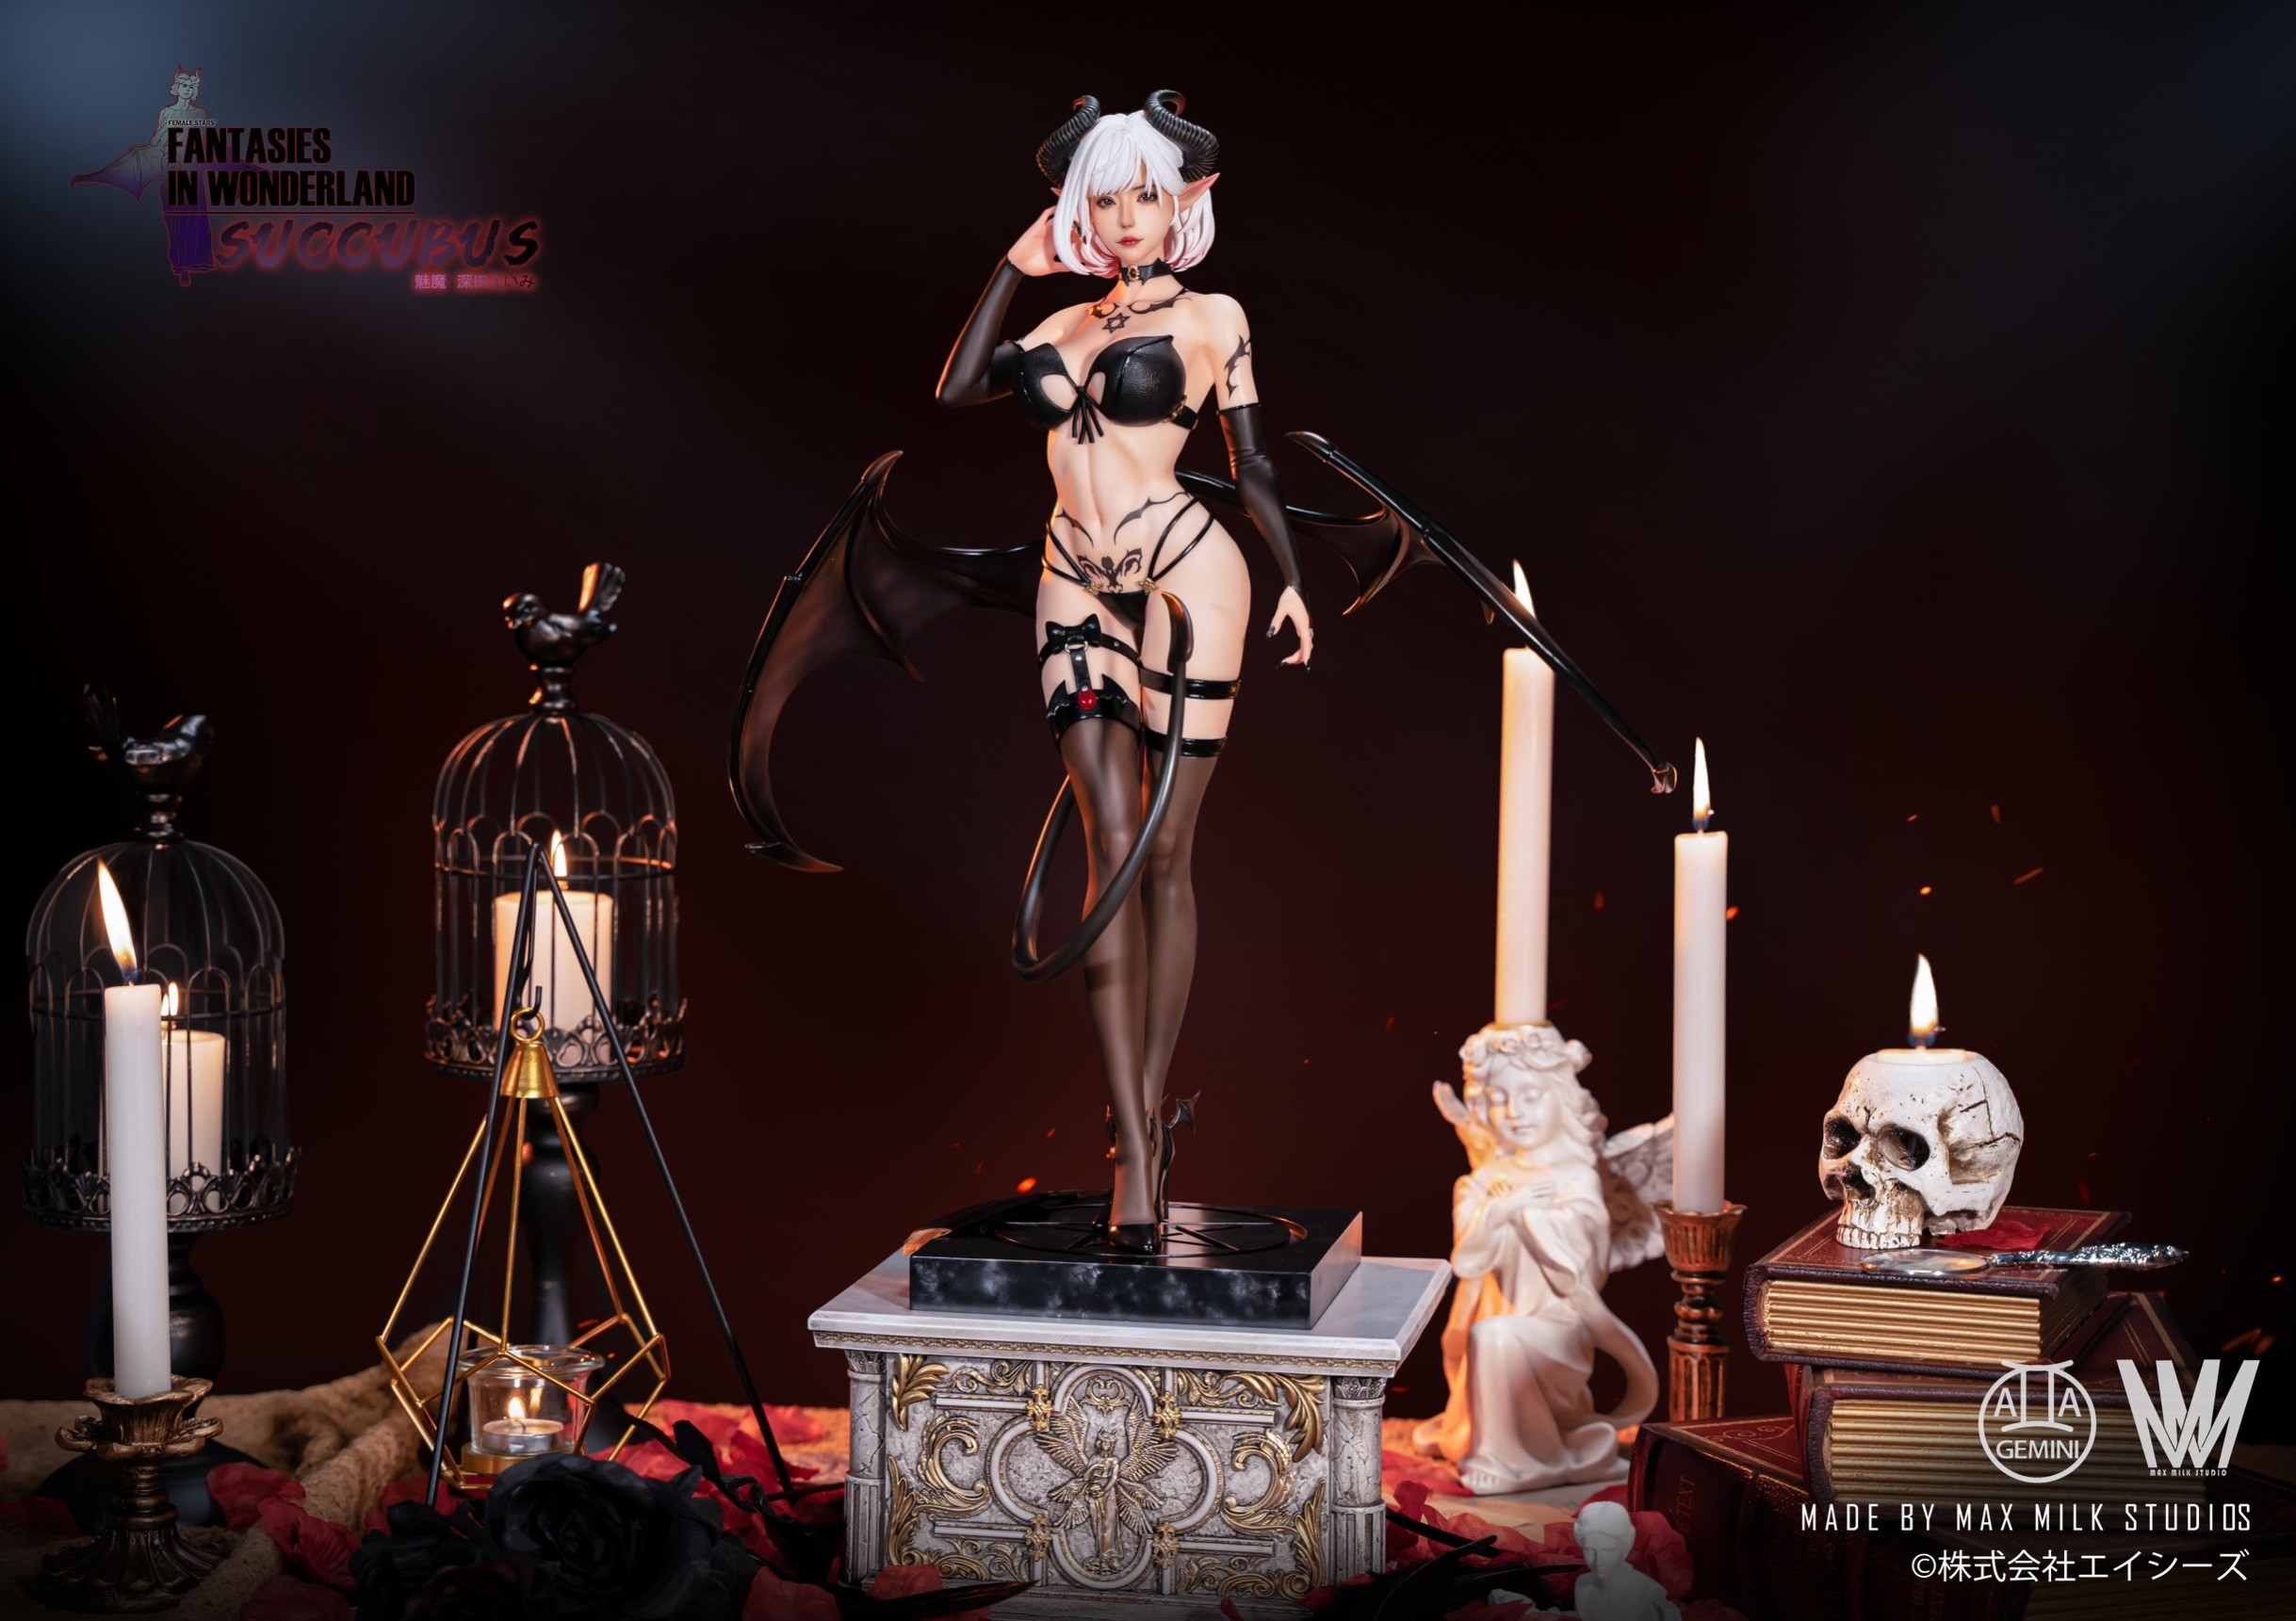 Eimi Fukuda as Succubus by Max Milk Studio (มัดจำ) [[SOLD OUT]]